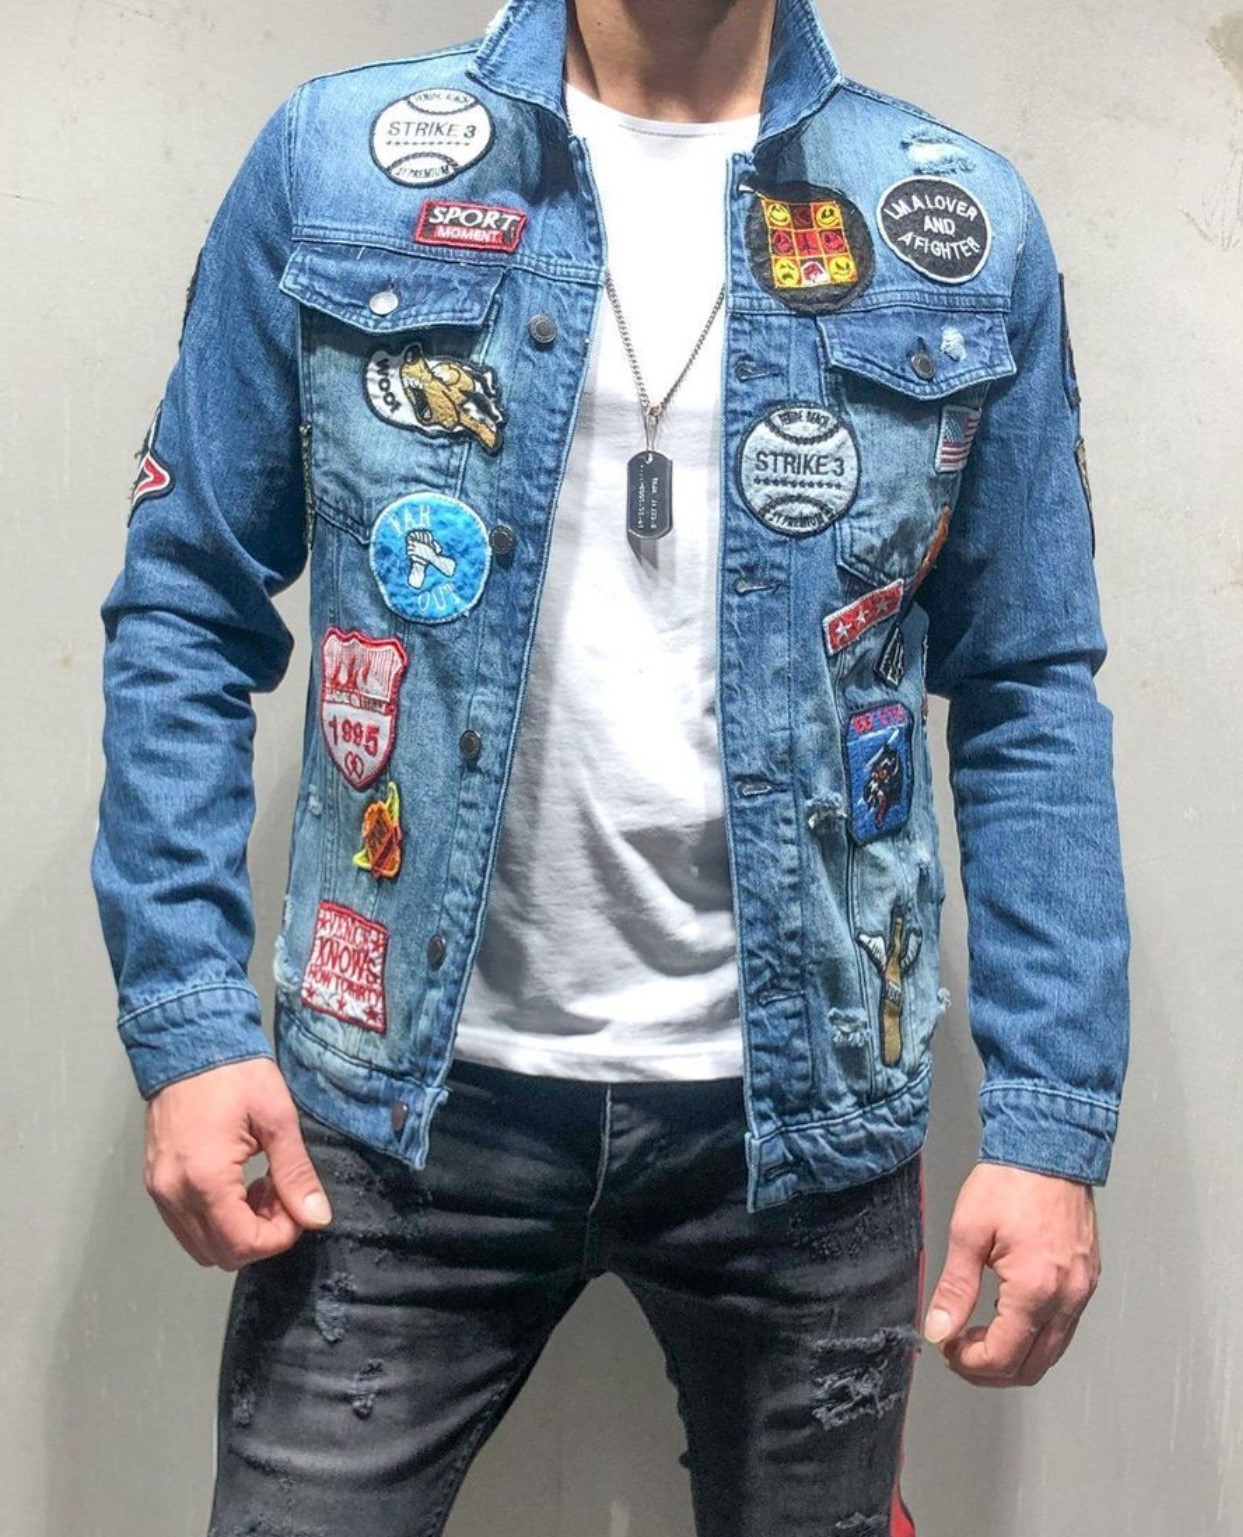 What Jackets Can You Put Patches On? - G For Games